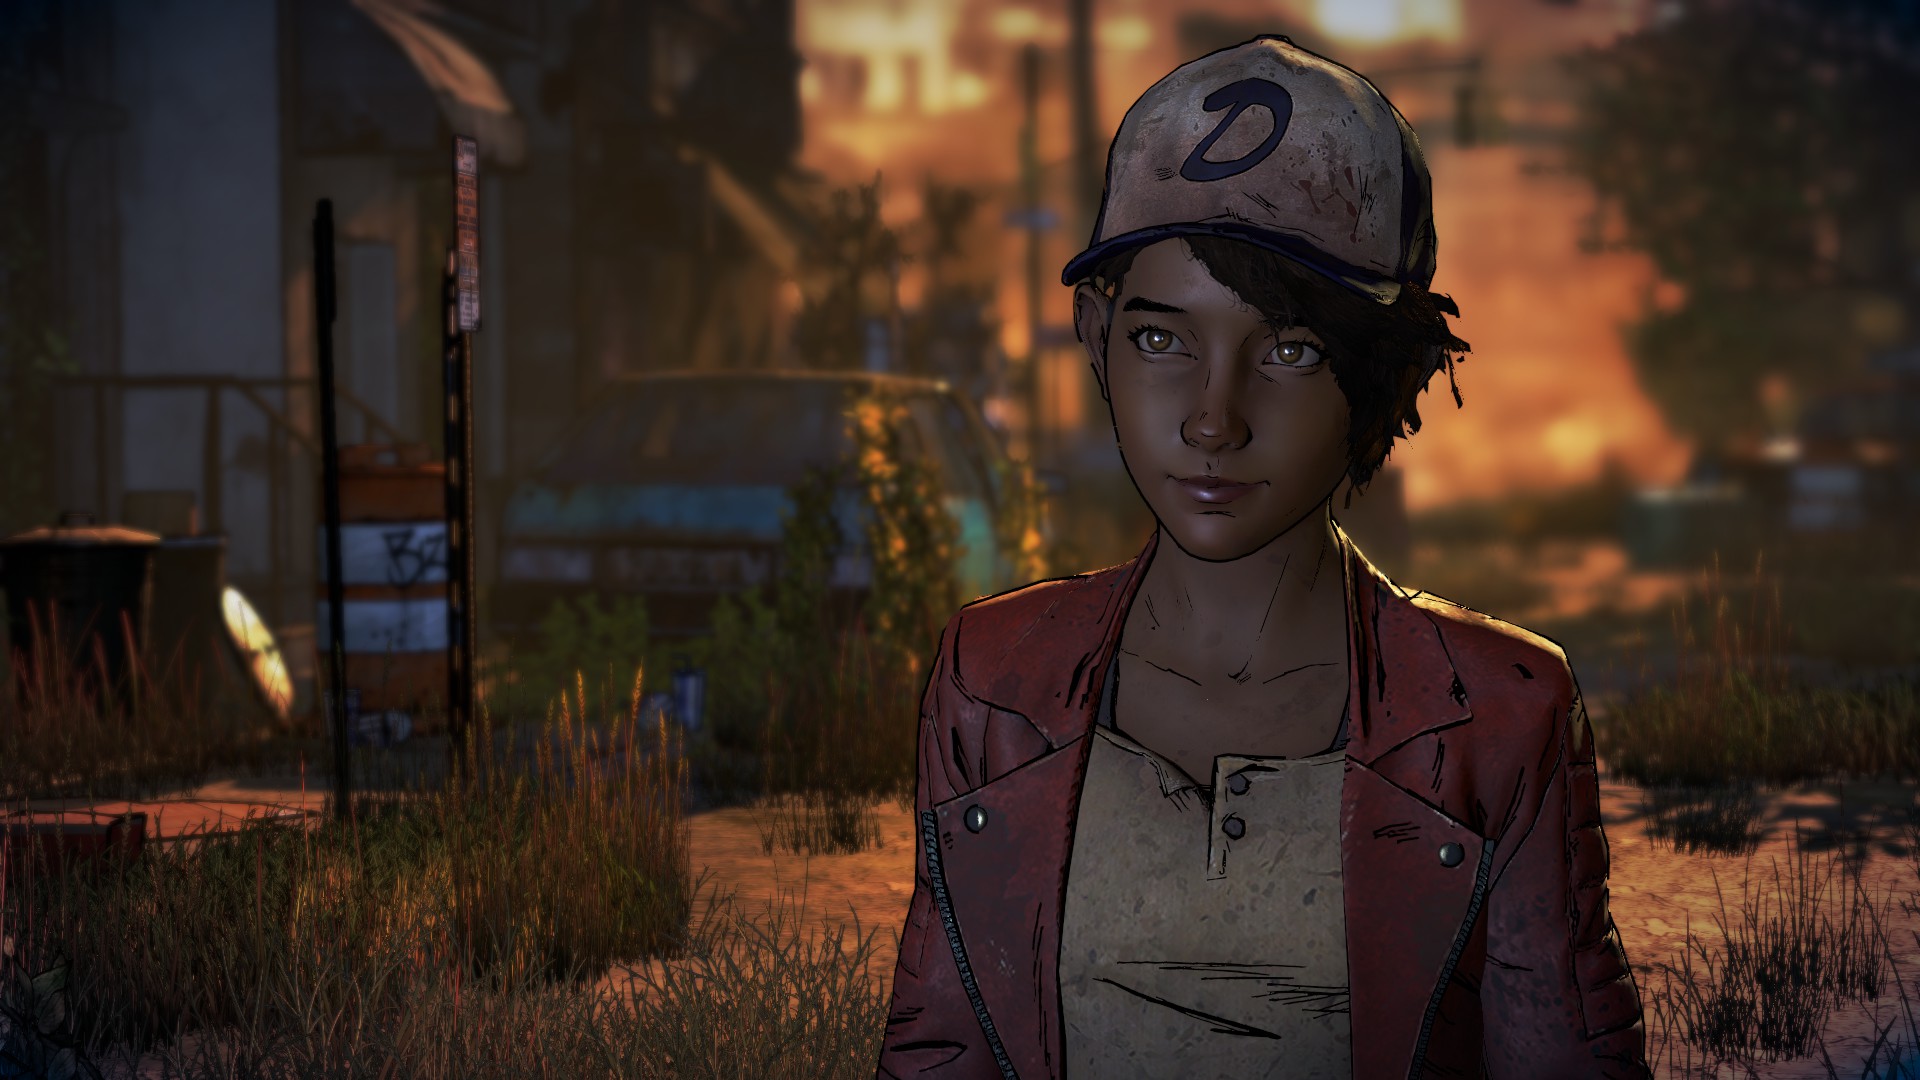 new walking dead game with clementine